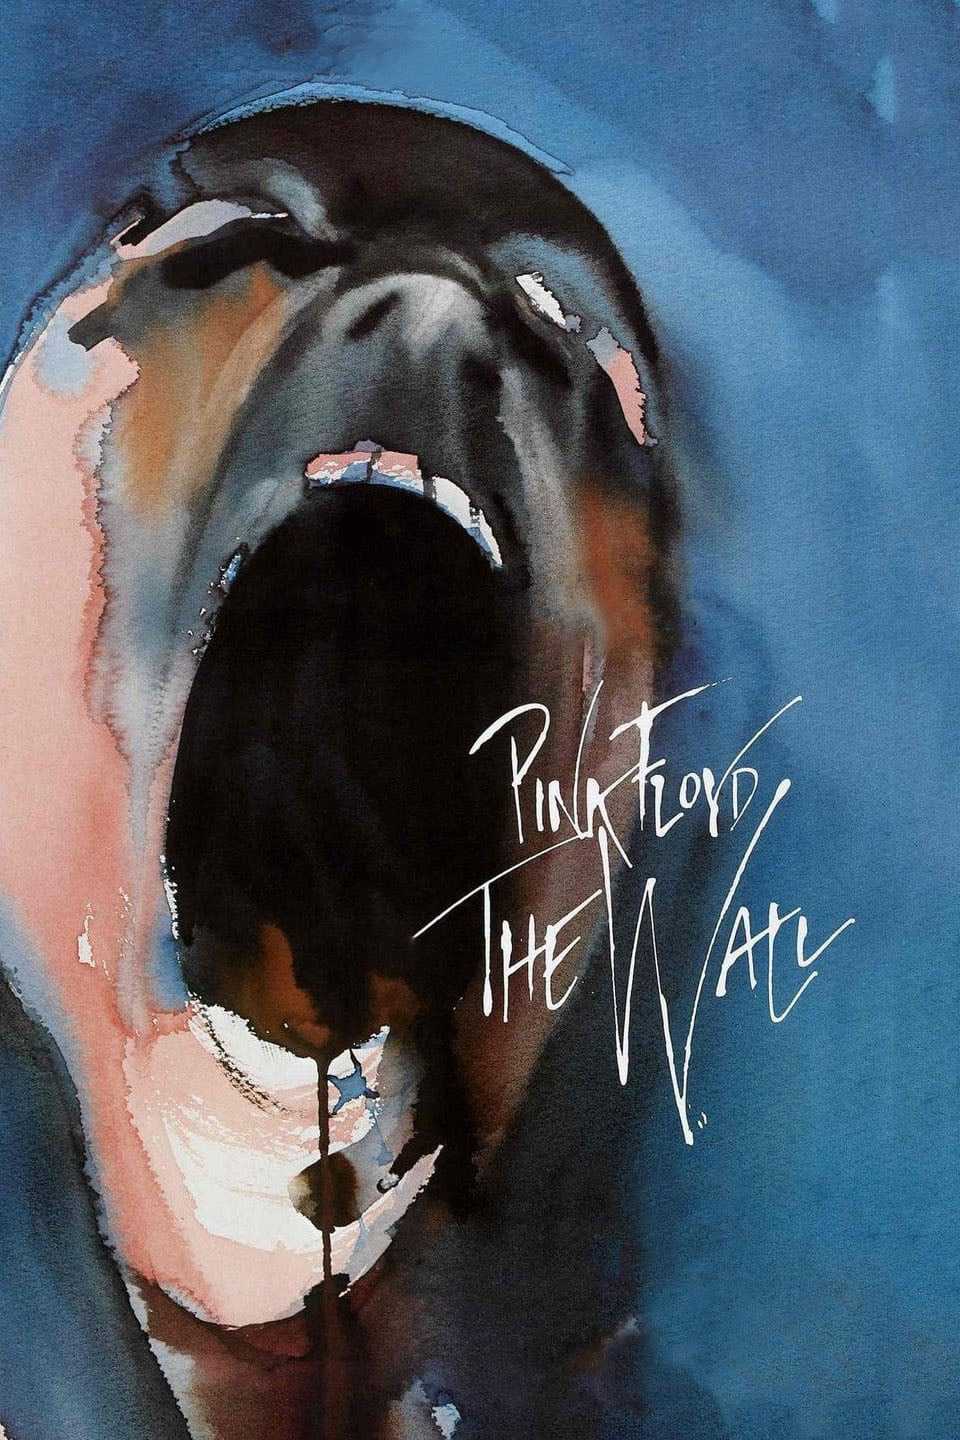 Pink floyd: the wall - Pink floyd: the wall